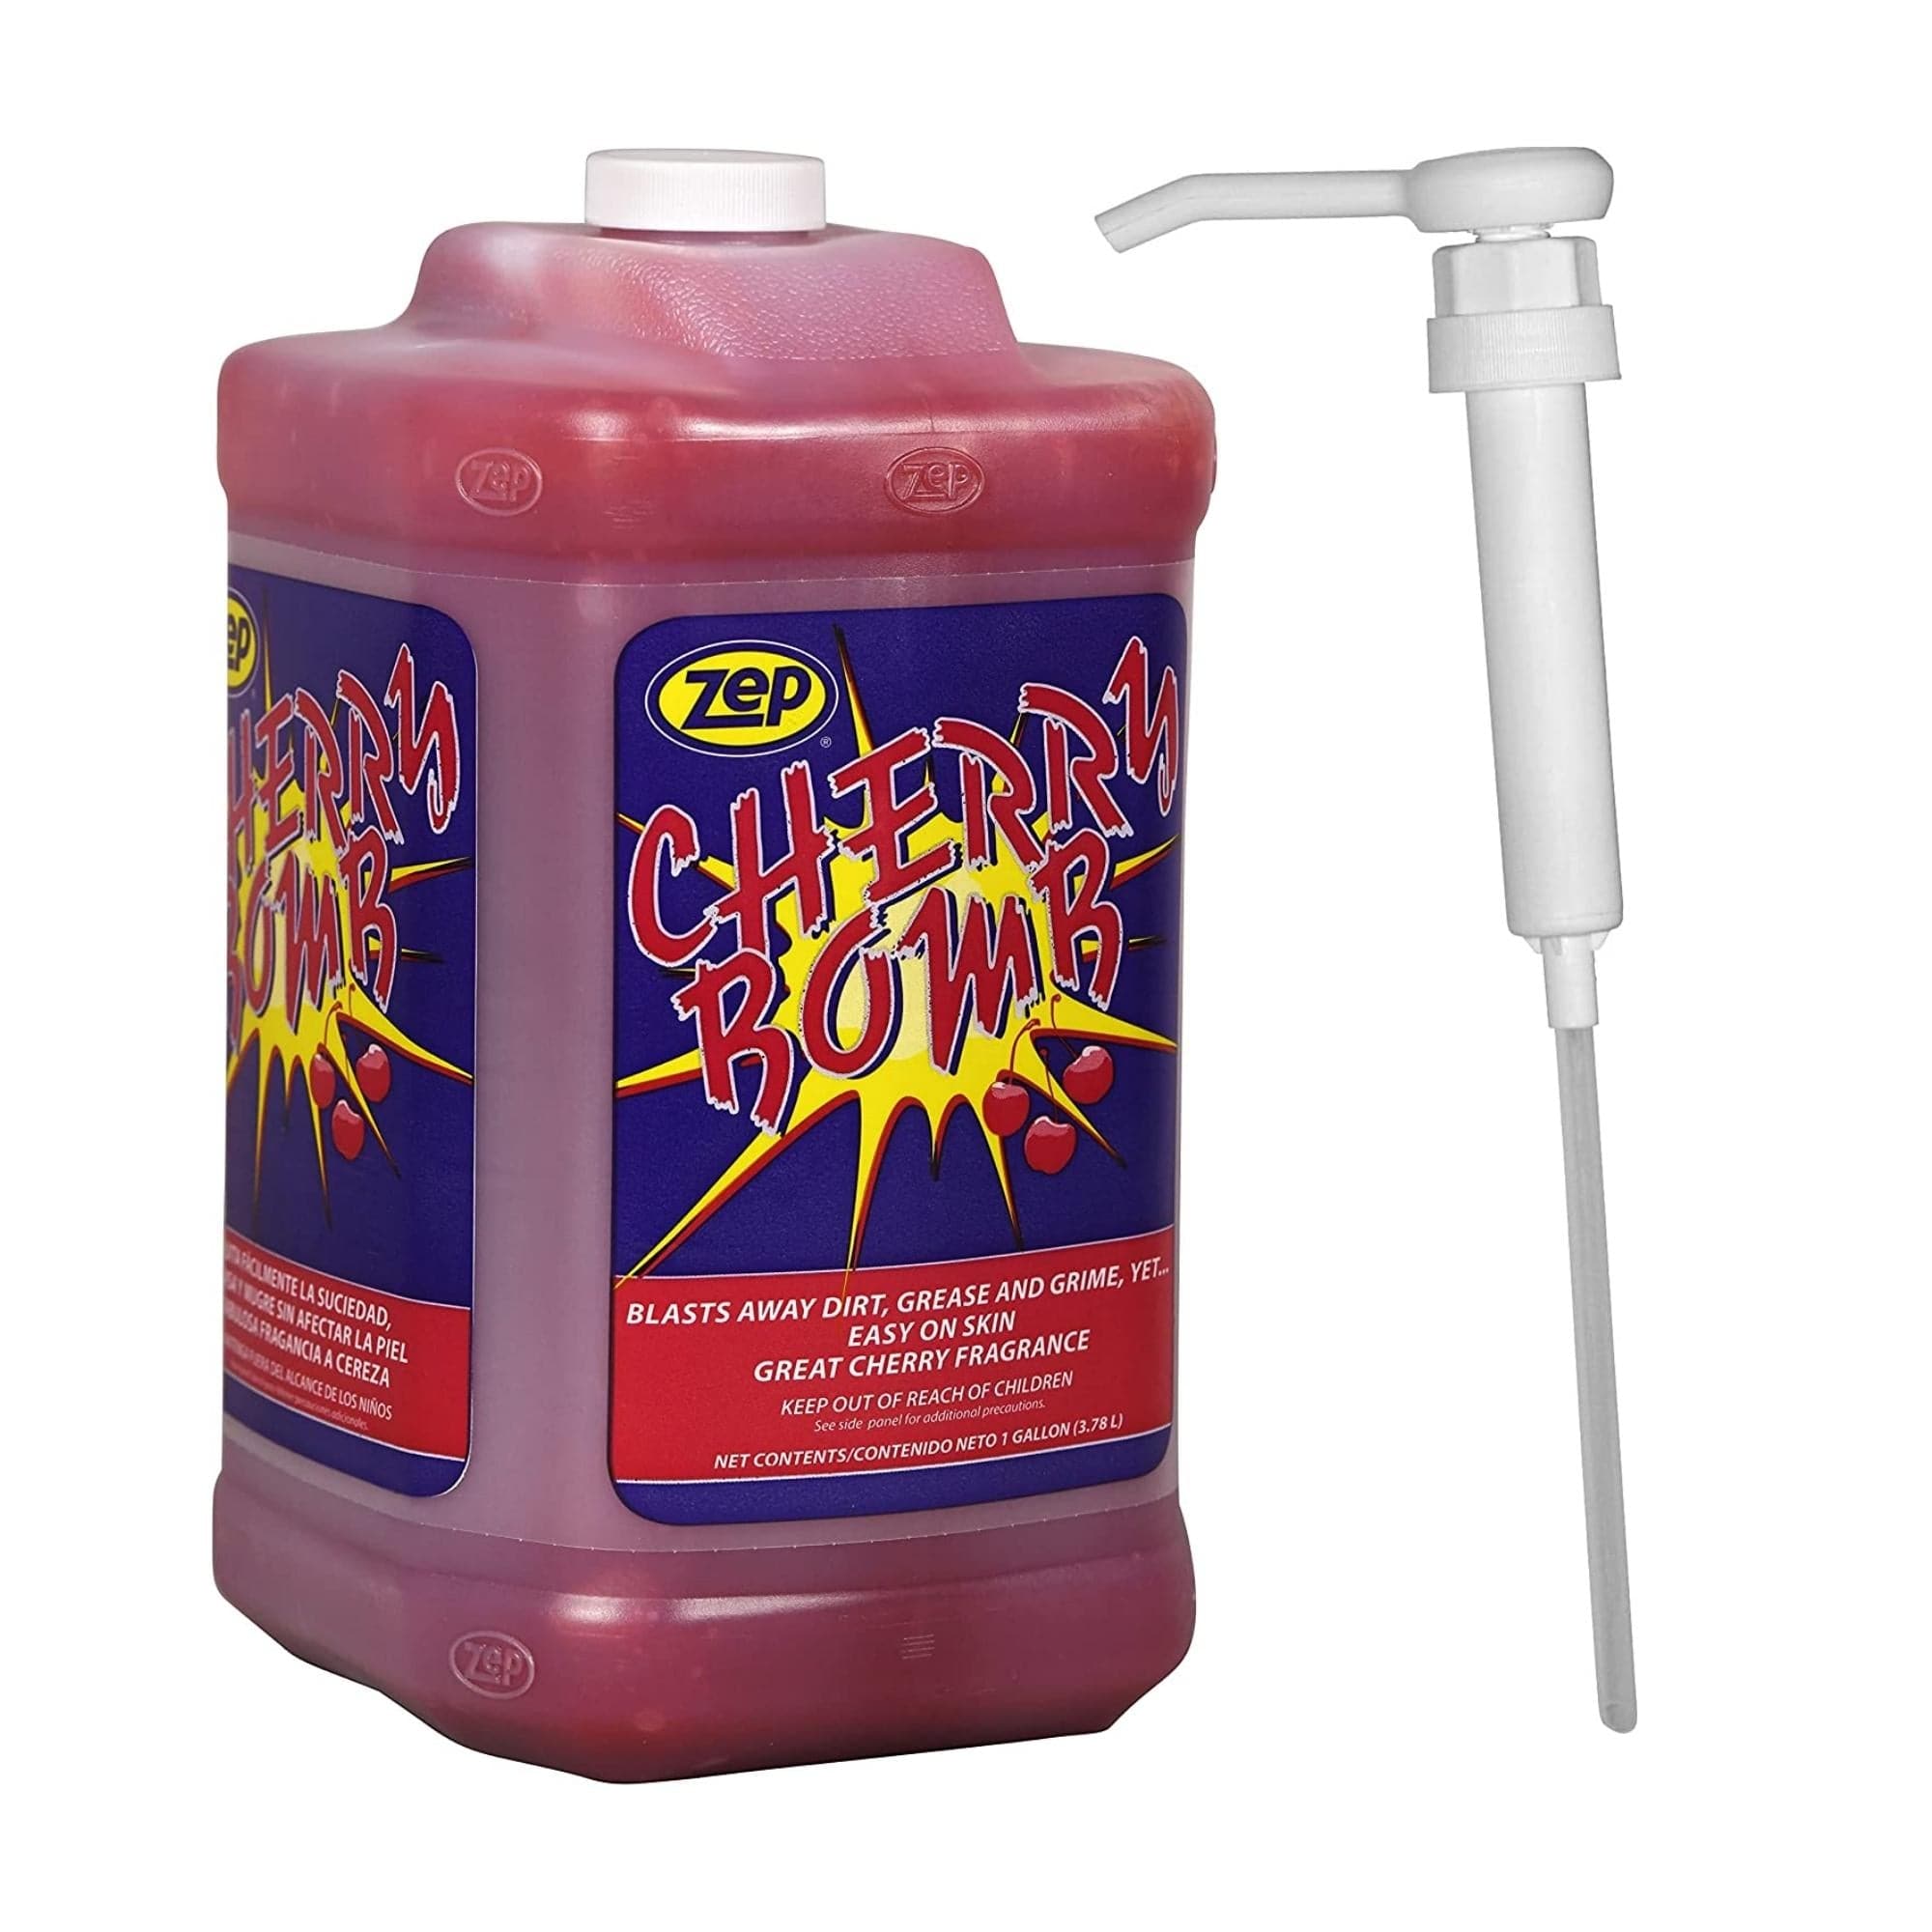 Zep Cherry Bomb Industrial Hand Cleaner Gel with Pumice - 8 oz (Case of 12)  - 1049795 - Heavy-Duty Shop Grade Formula 